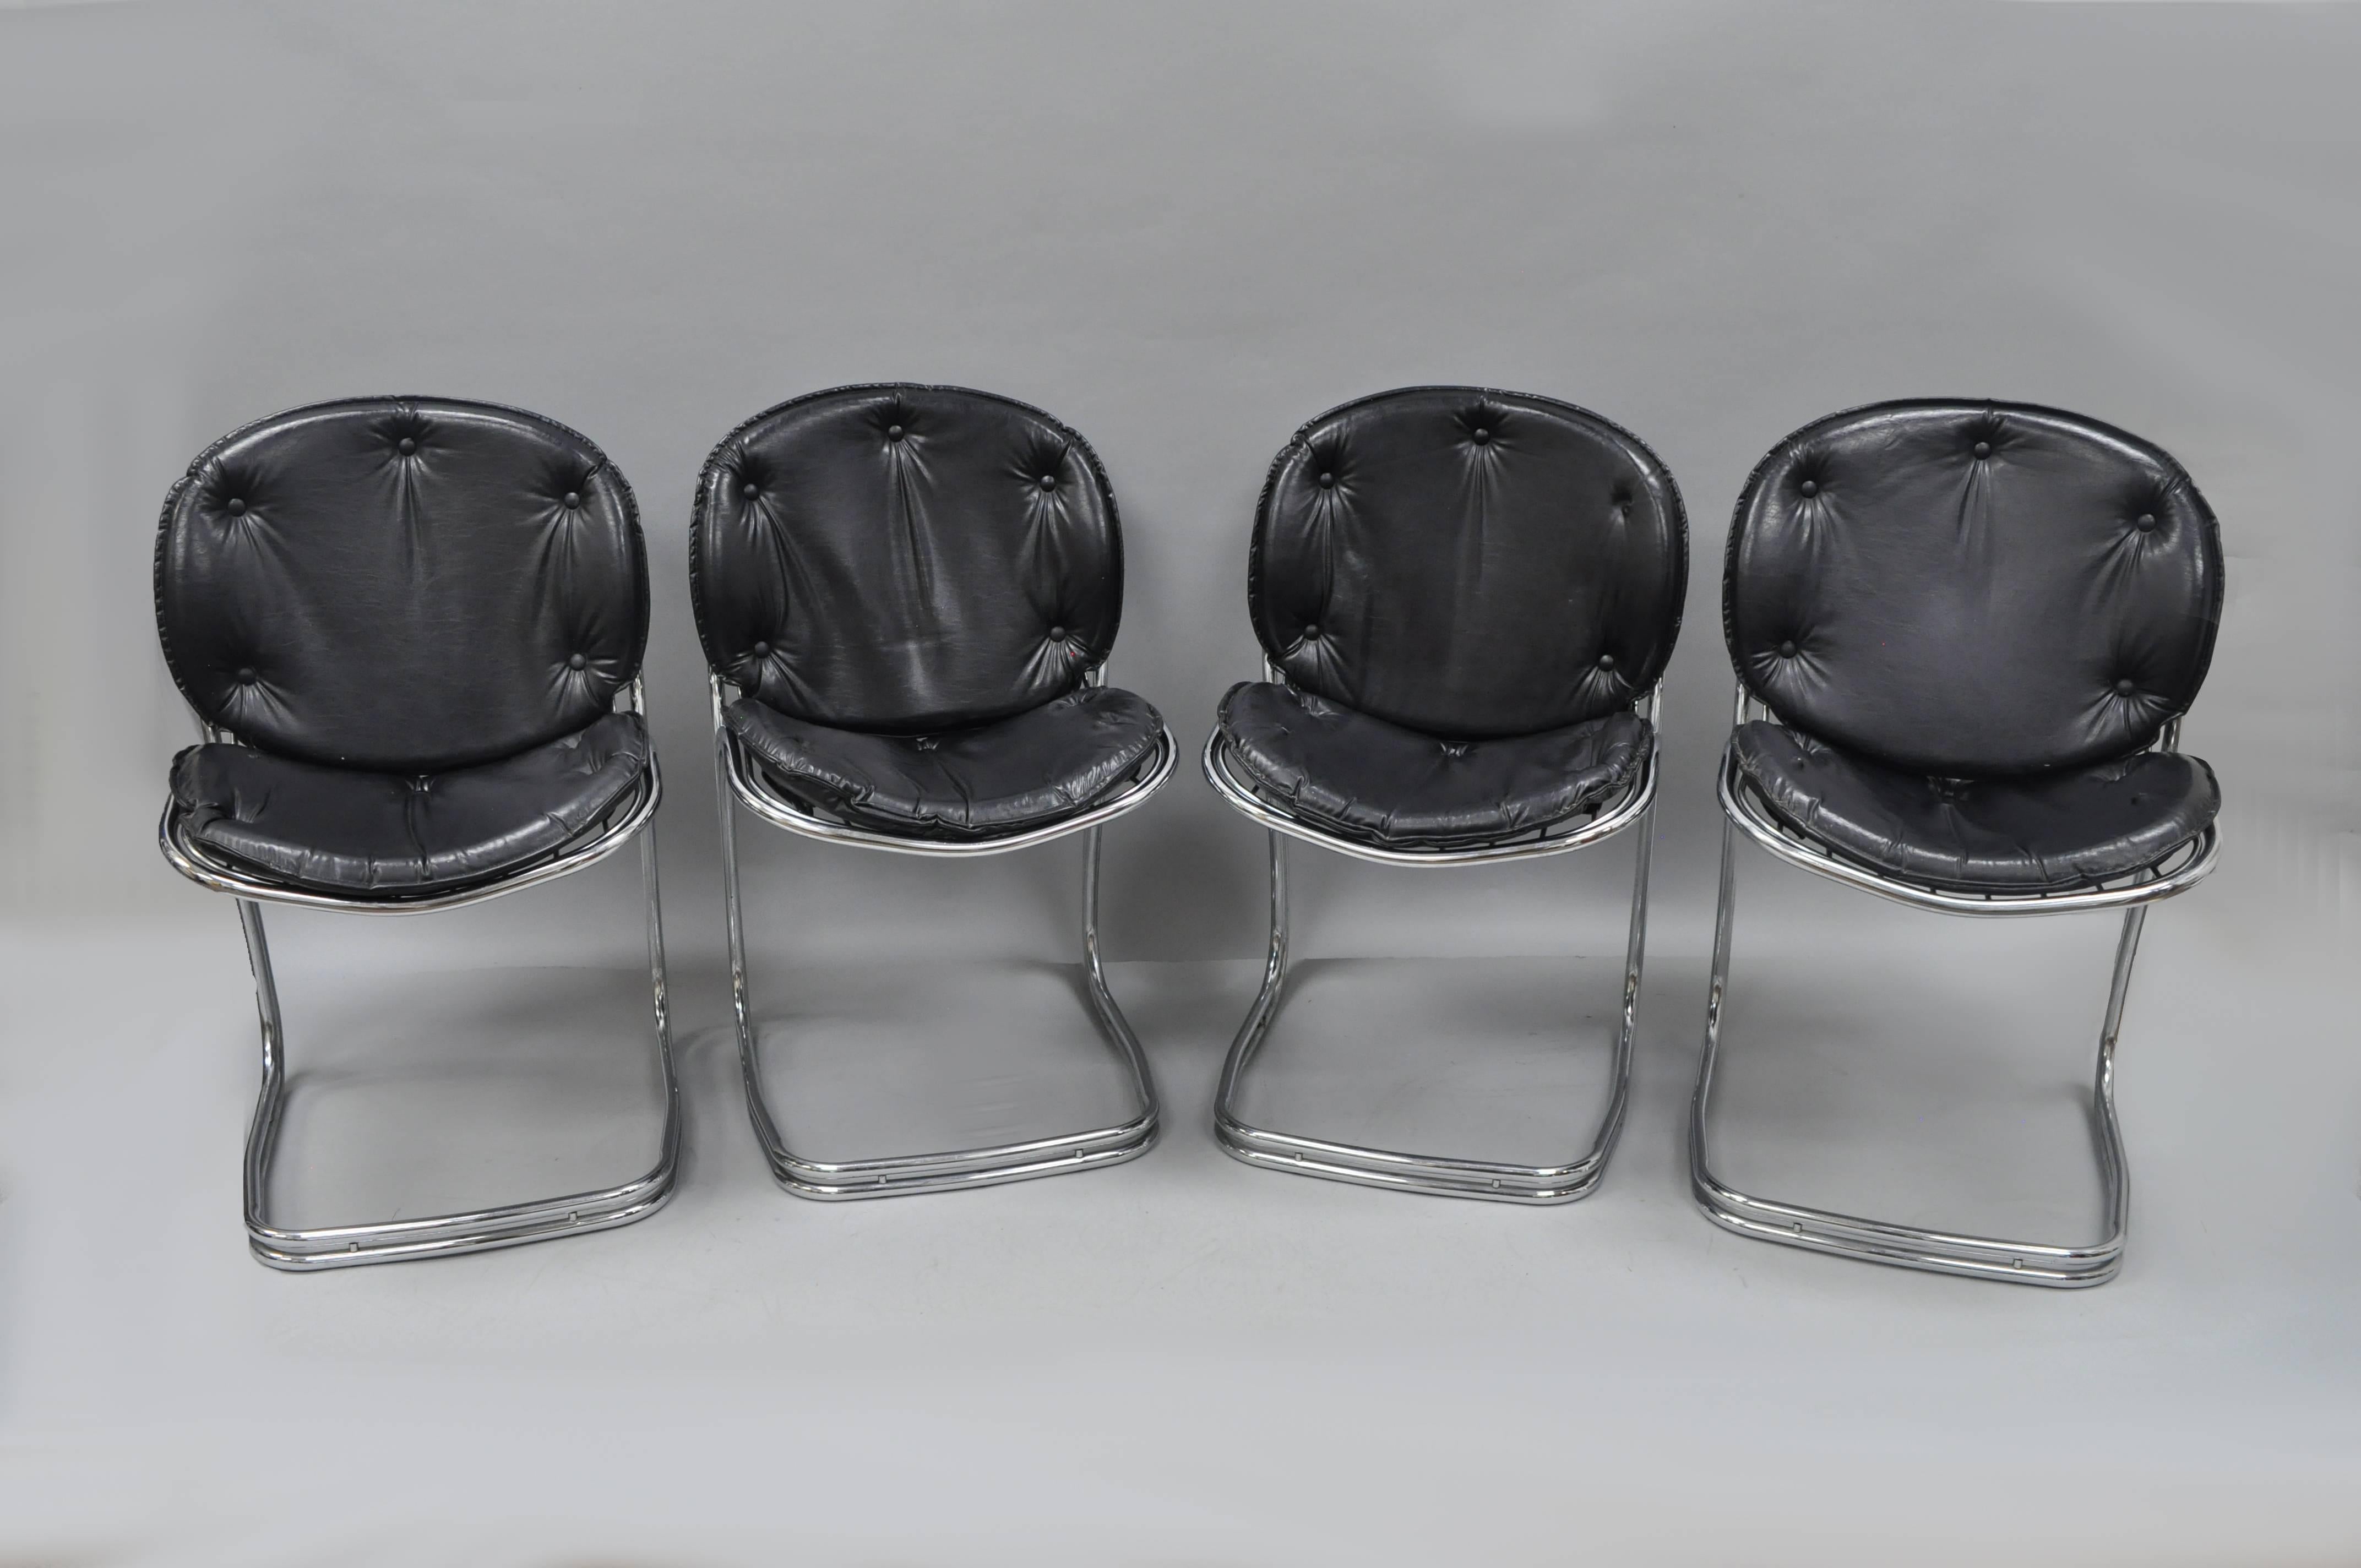 Set of four vintage midcentury Italian Modern chrome and black vinyl dining chairs attributed to Gastone Rinaldi for RIMA. Set features sleek sculptural form, wire chrome frames, button tufted black vinyl cushions, and clean Modernist line.